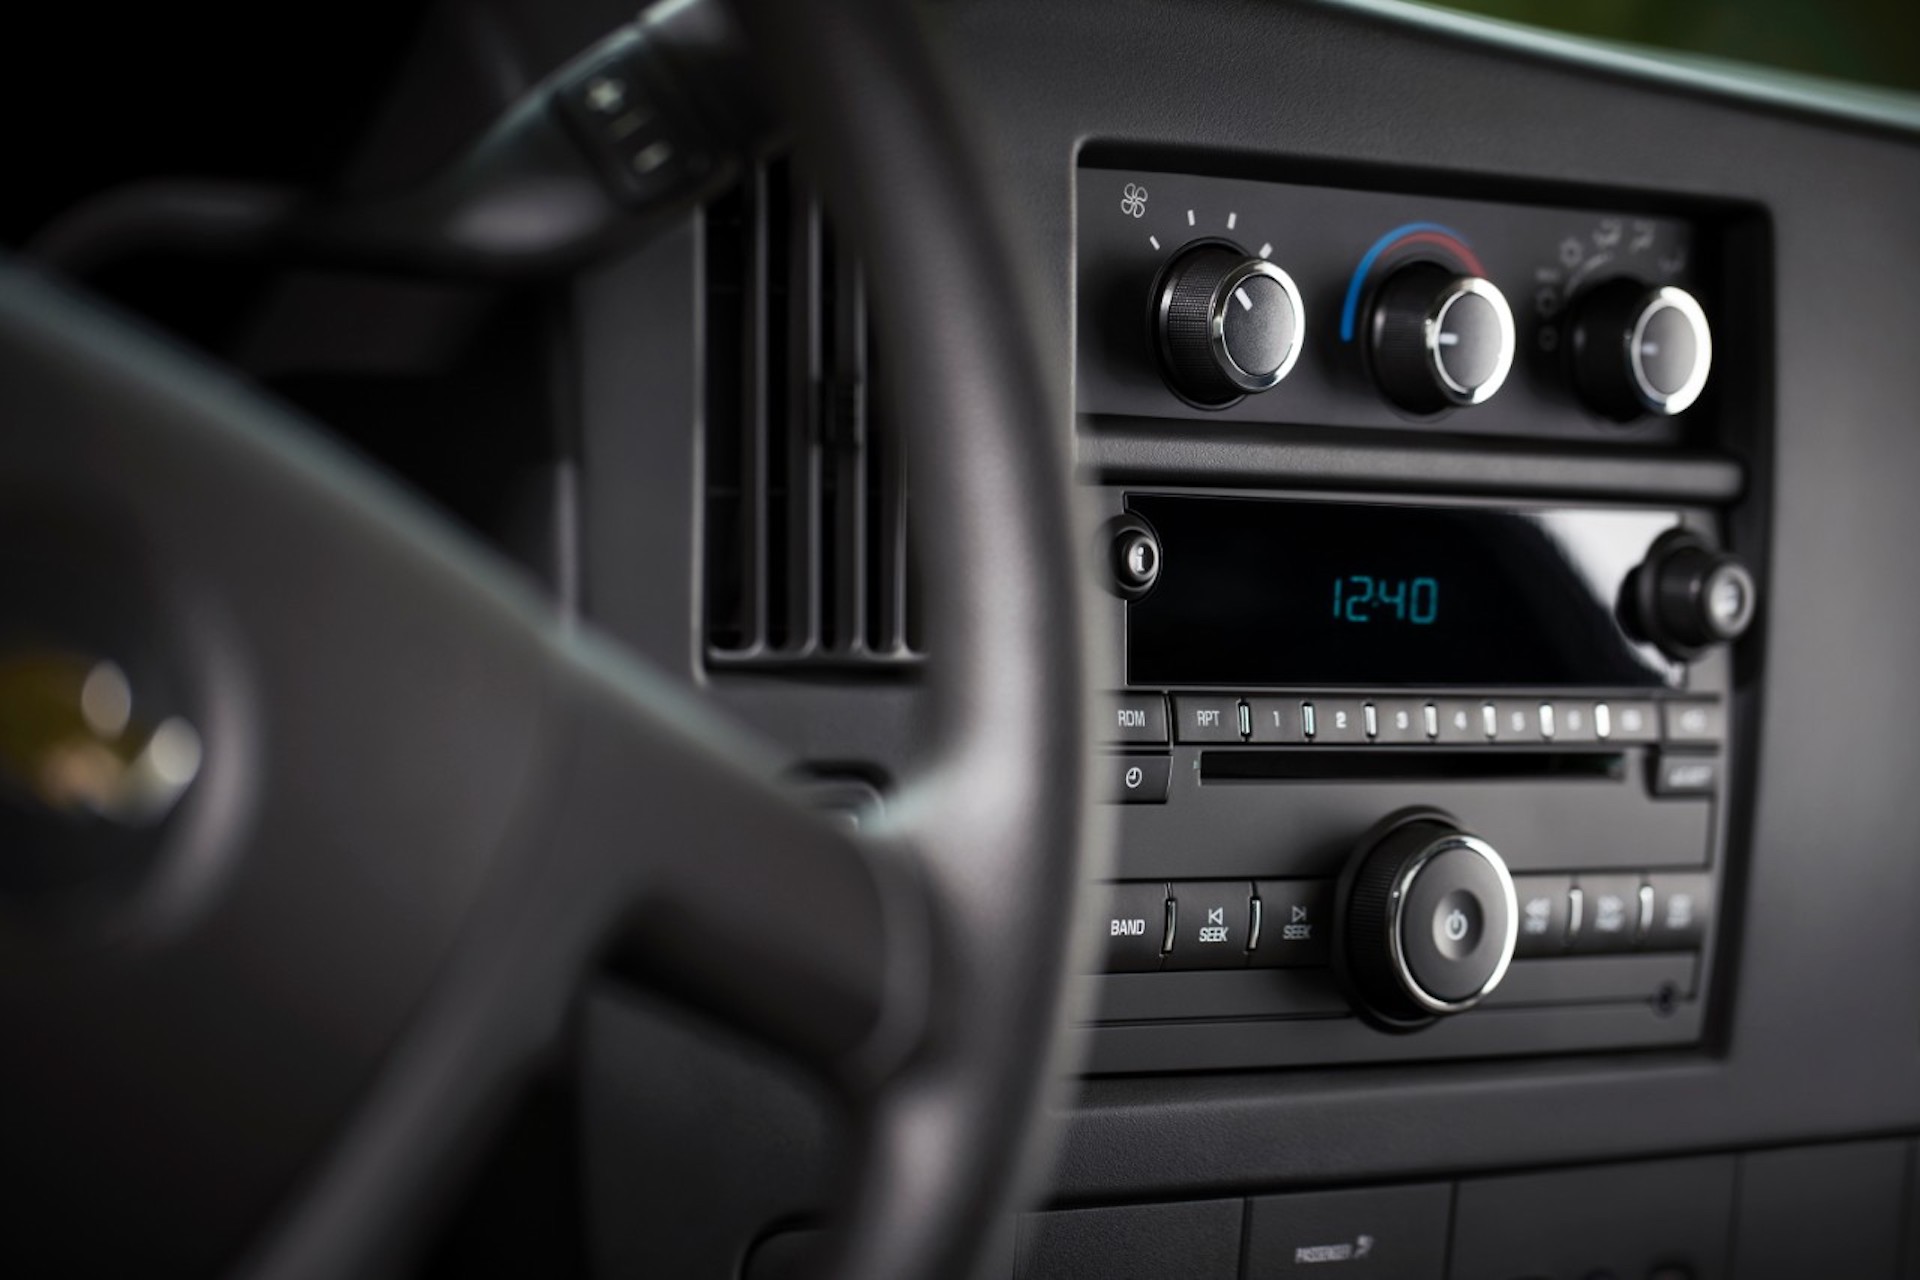 An image of a CD Player in a Chevrolet Express van, one of few models GM is killing the option for.